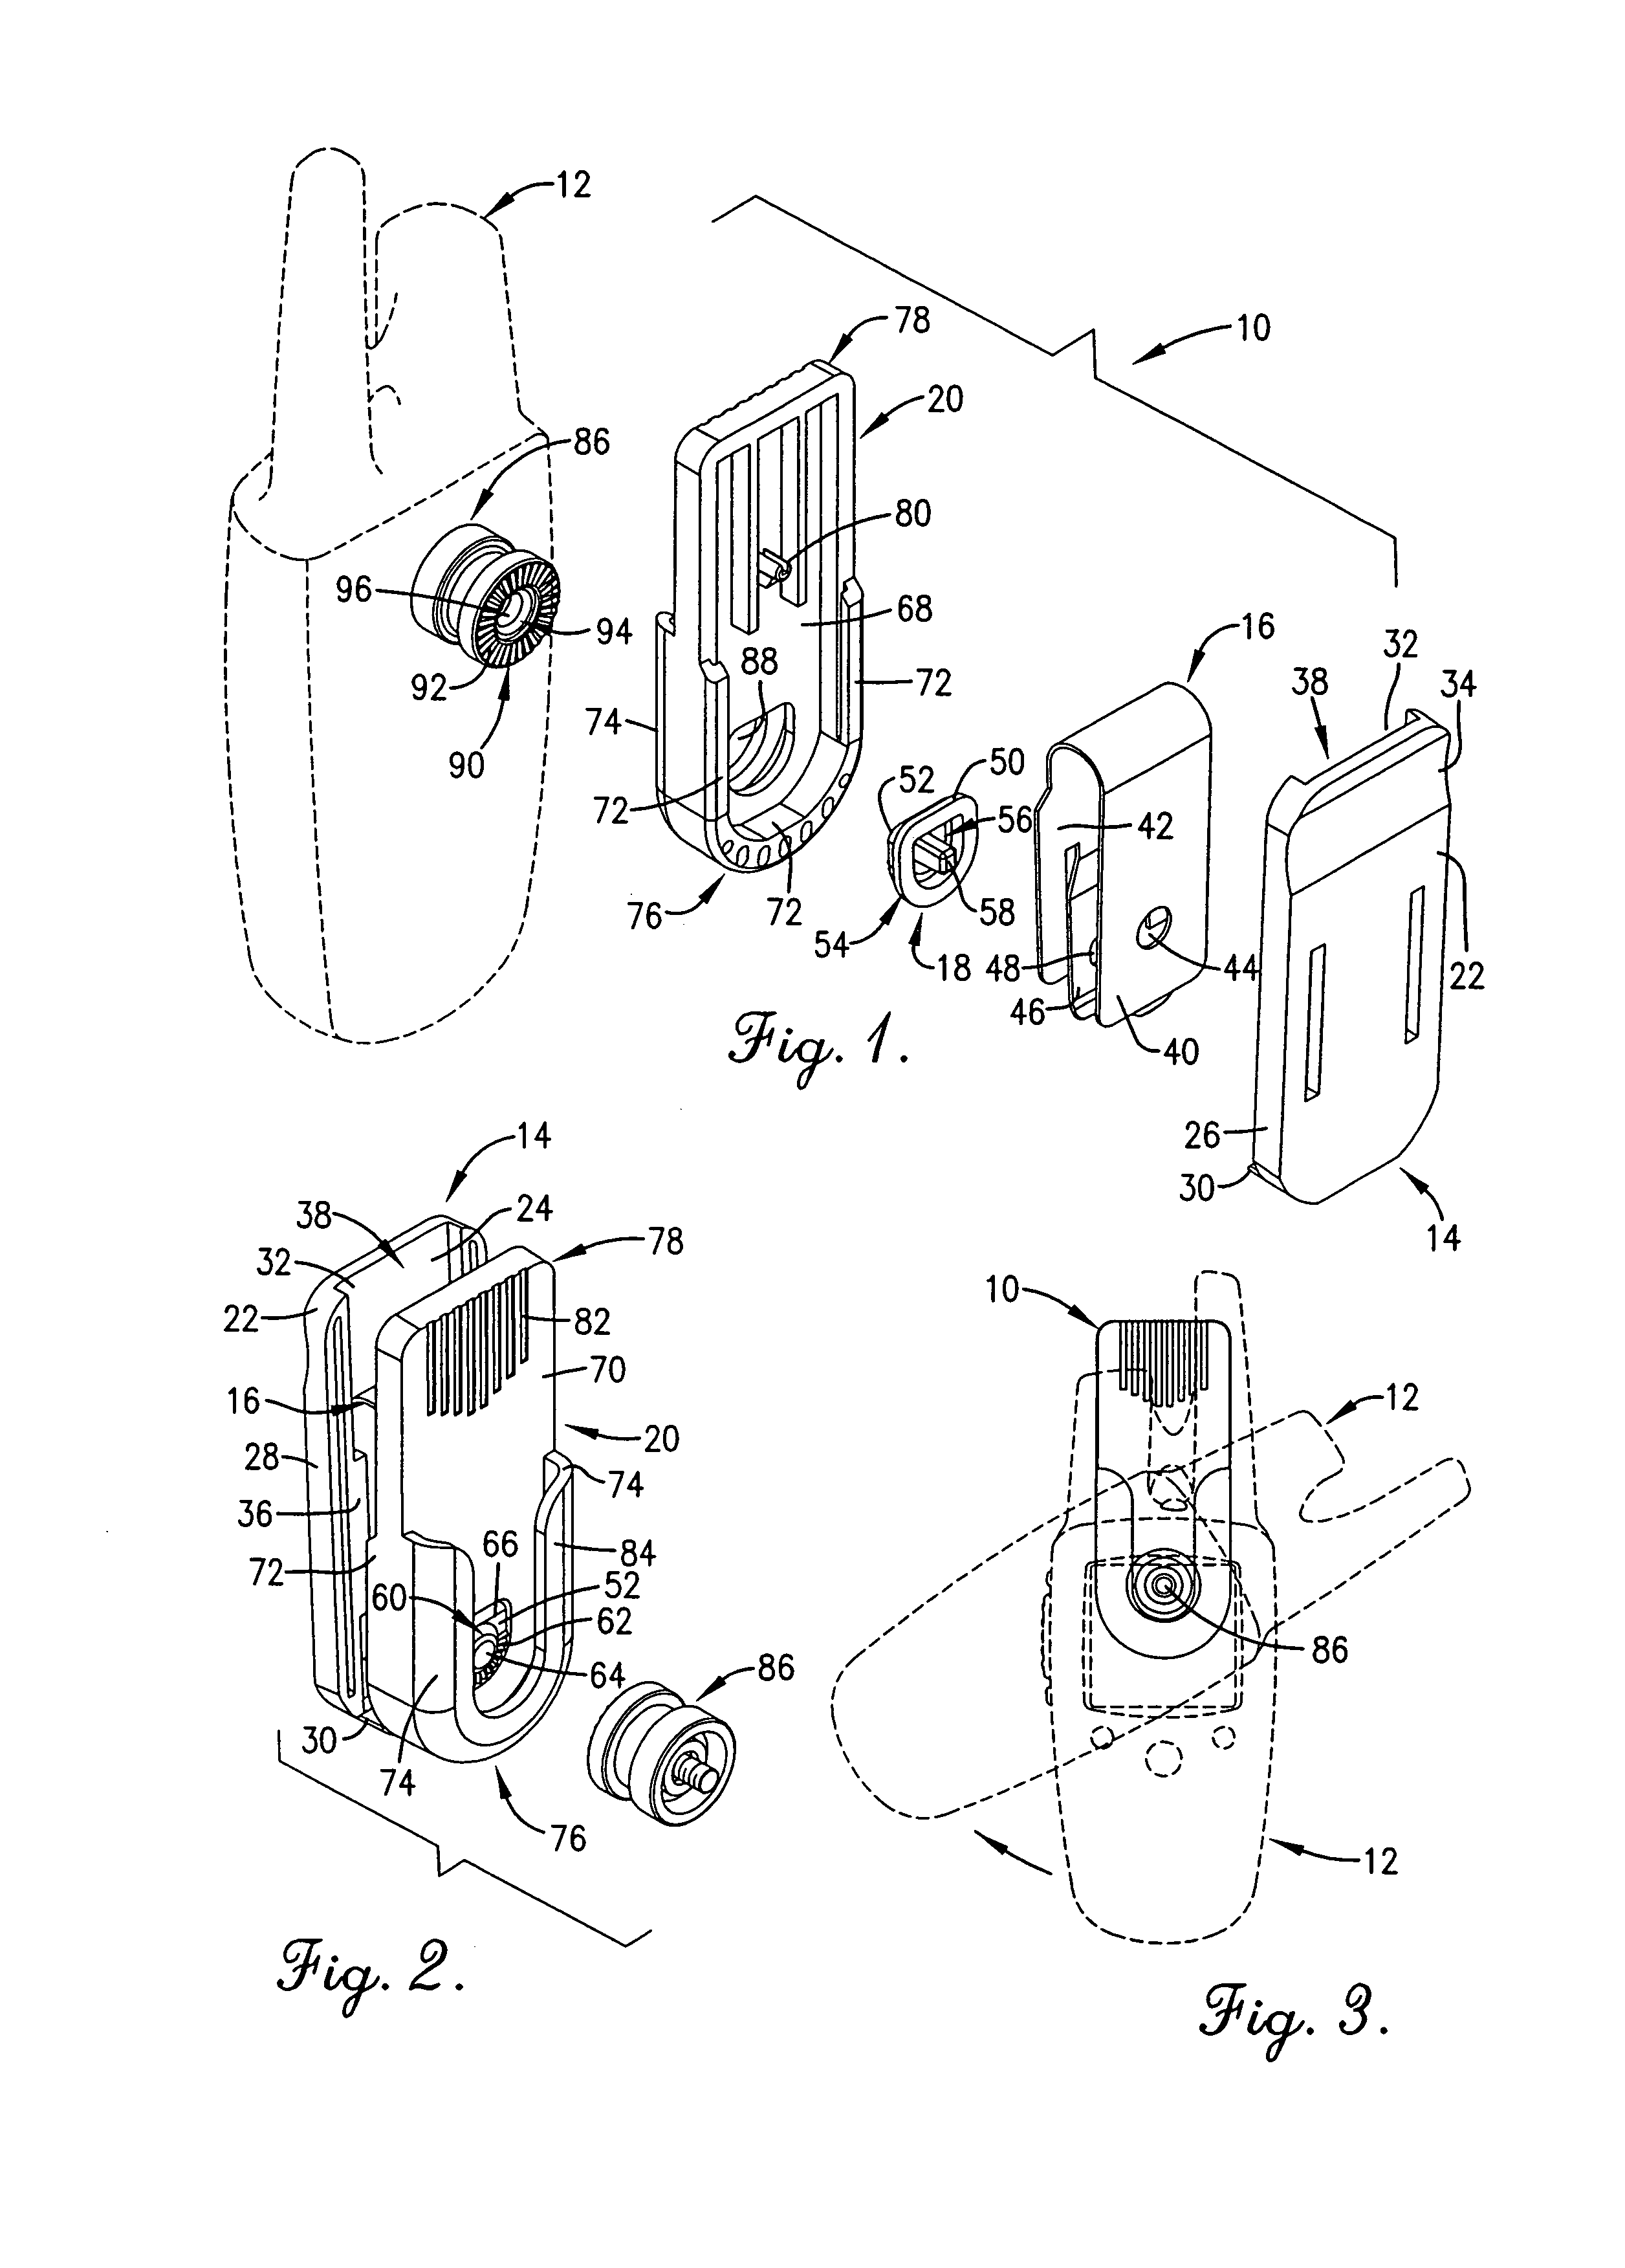 Carrying assembly and method for securement of electronic devices